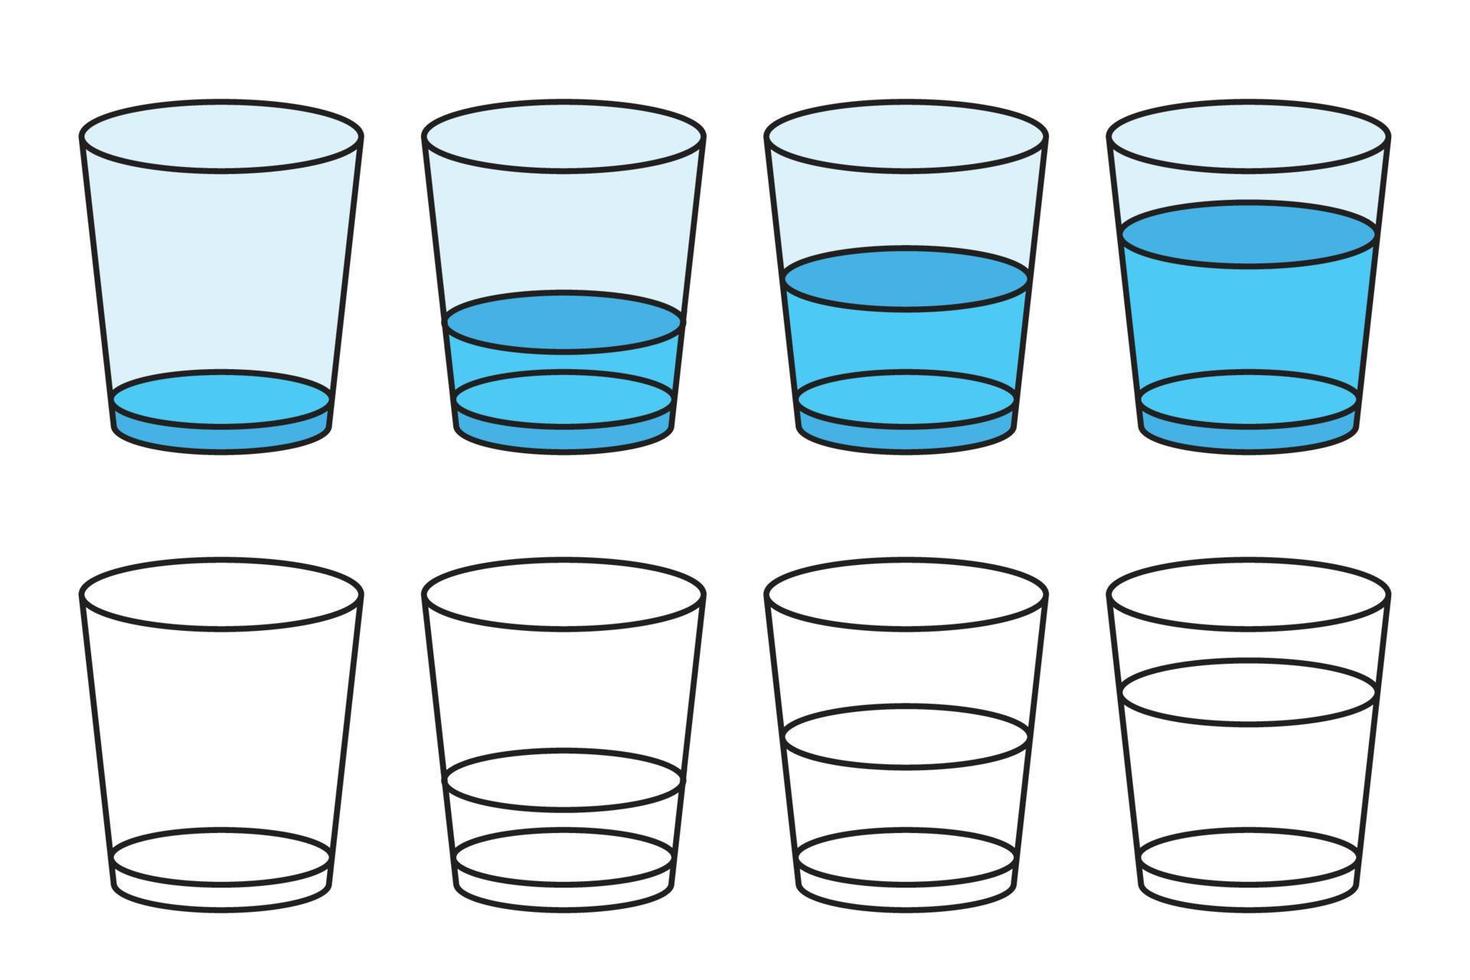 https://static.vecteezy.com/system/resources/previews/022/228/301/non_2x/glass-of-water-icon-and-doddle-object-free-vector.jpg